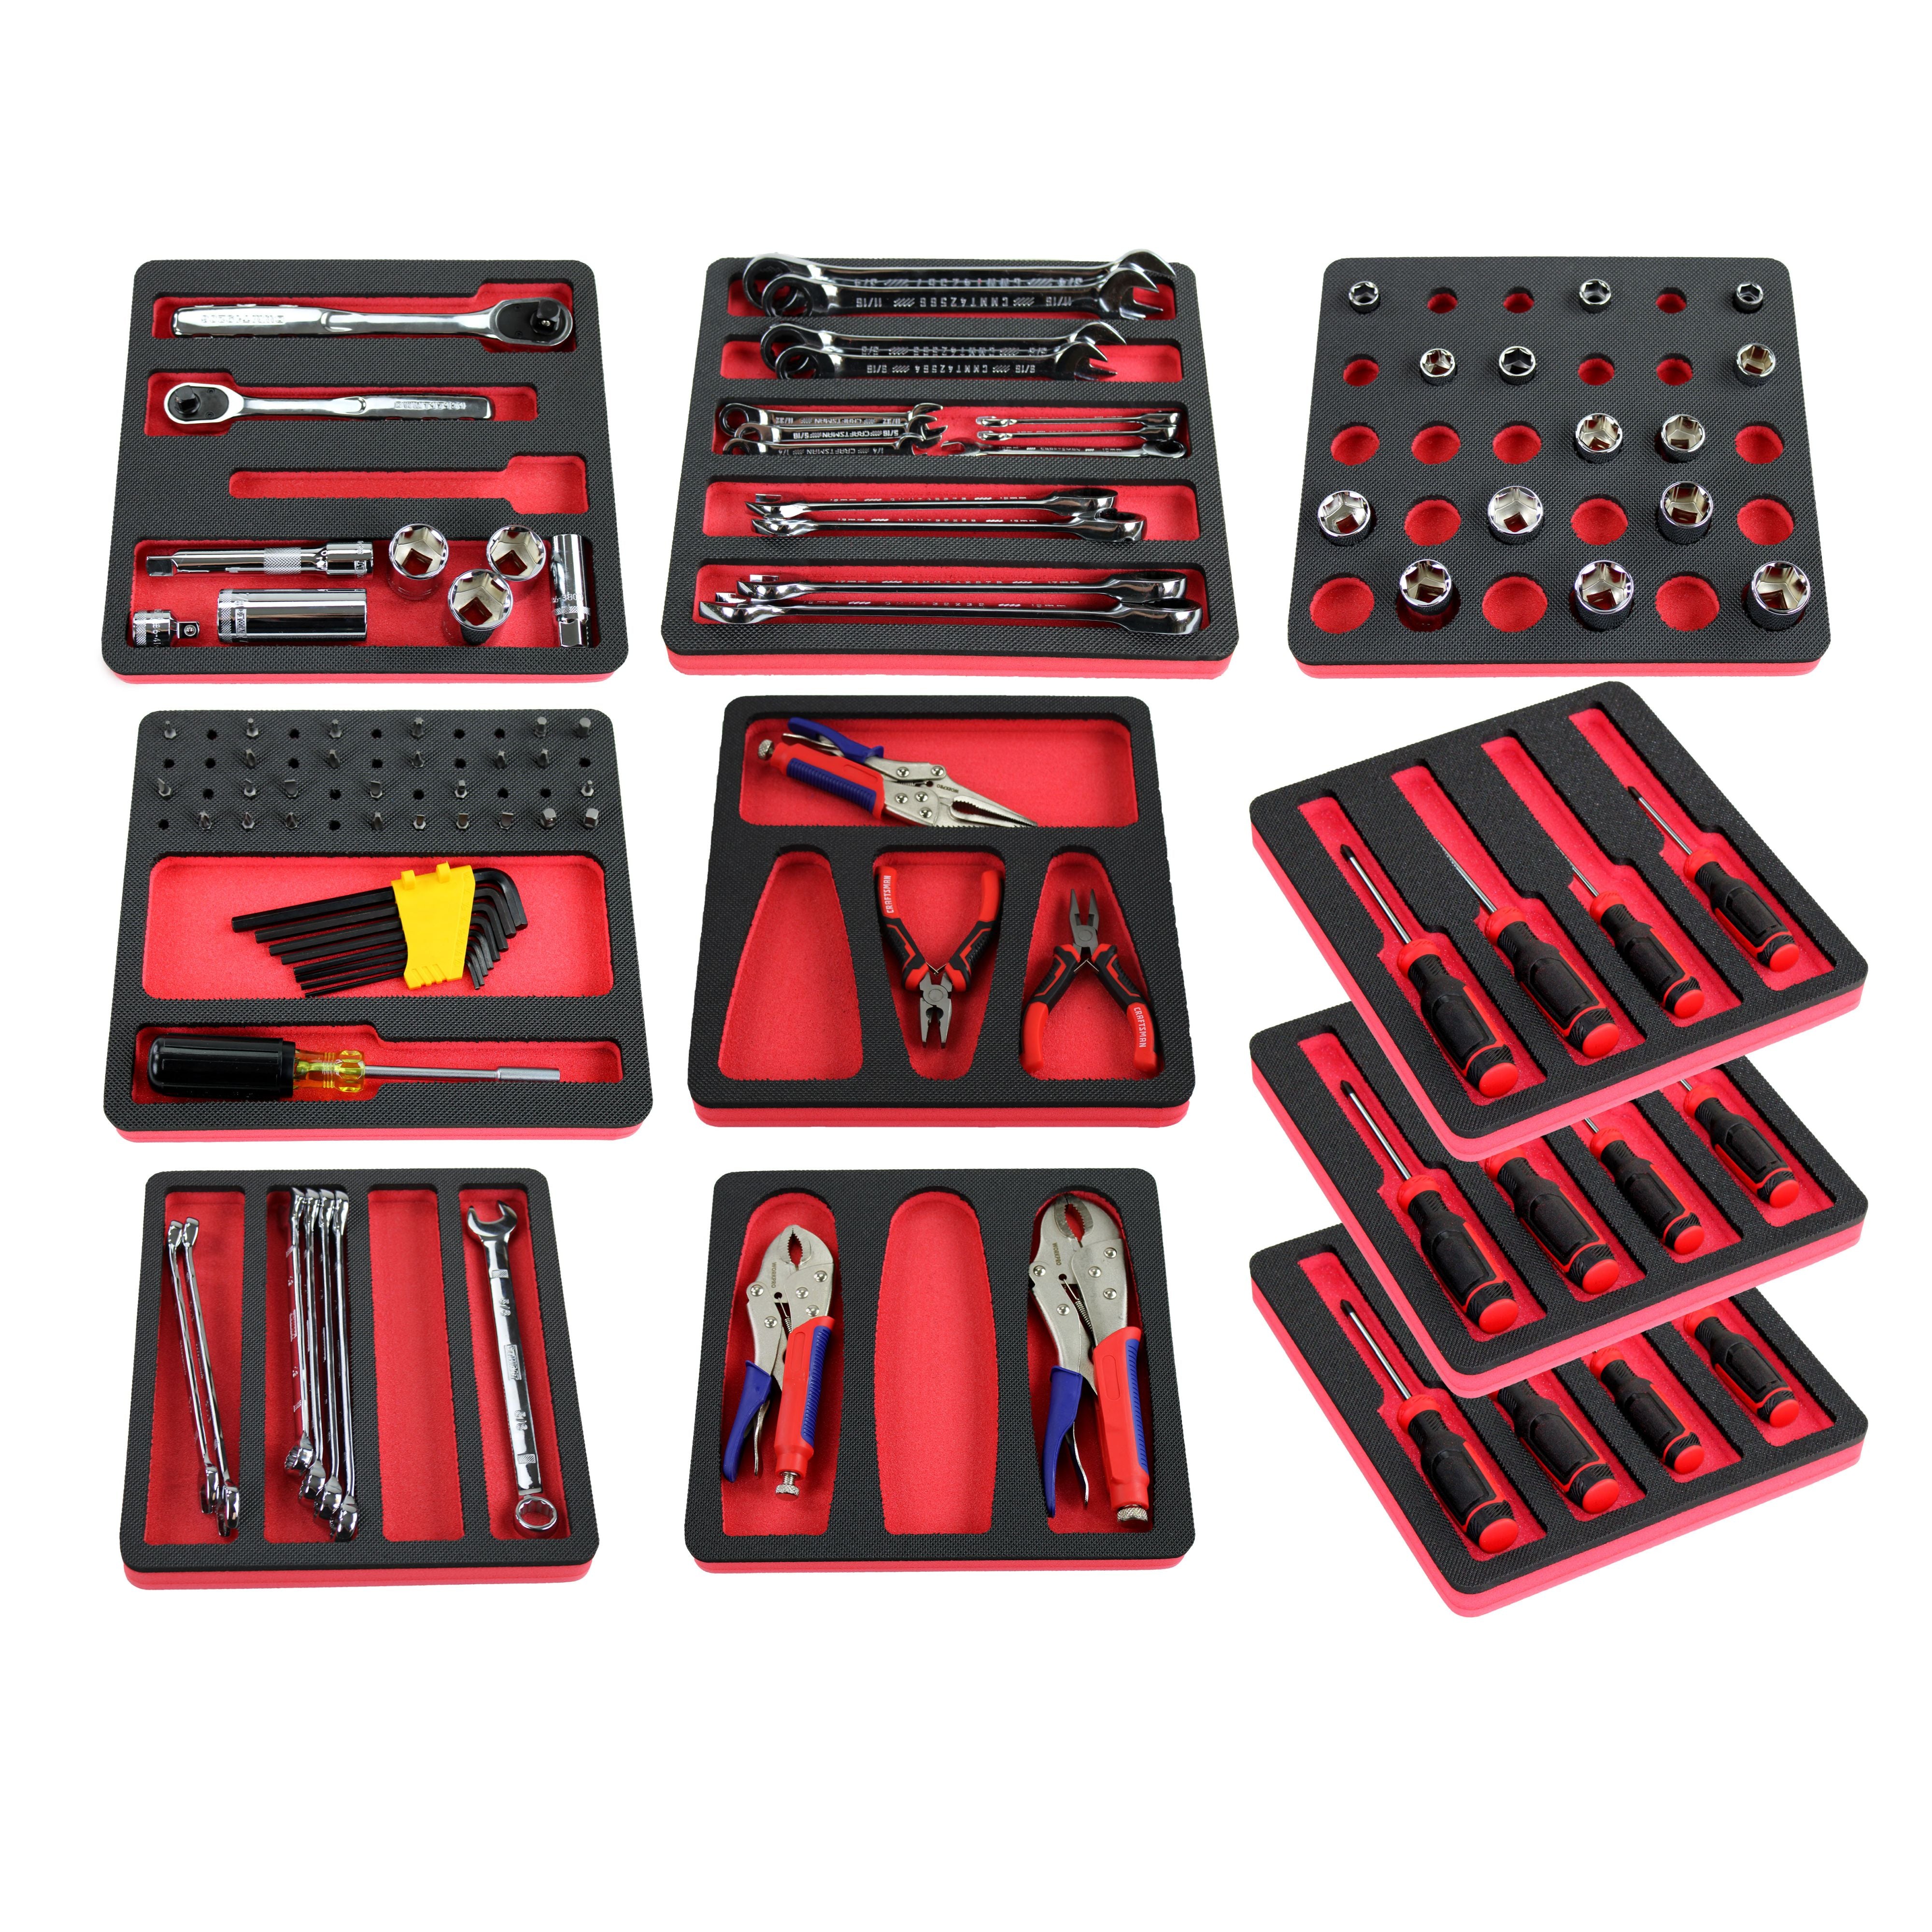 Tool Drawer Organizer 10-Piece Insert Set Red and Black Durable Foam Holds Many Tools and Accessories 10 x 11 Inch Trays Fits Craftsman Husky Kobalt Milwaukee Many Others